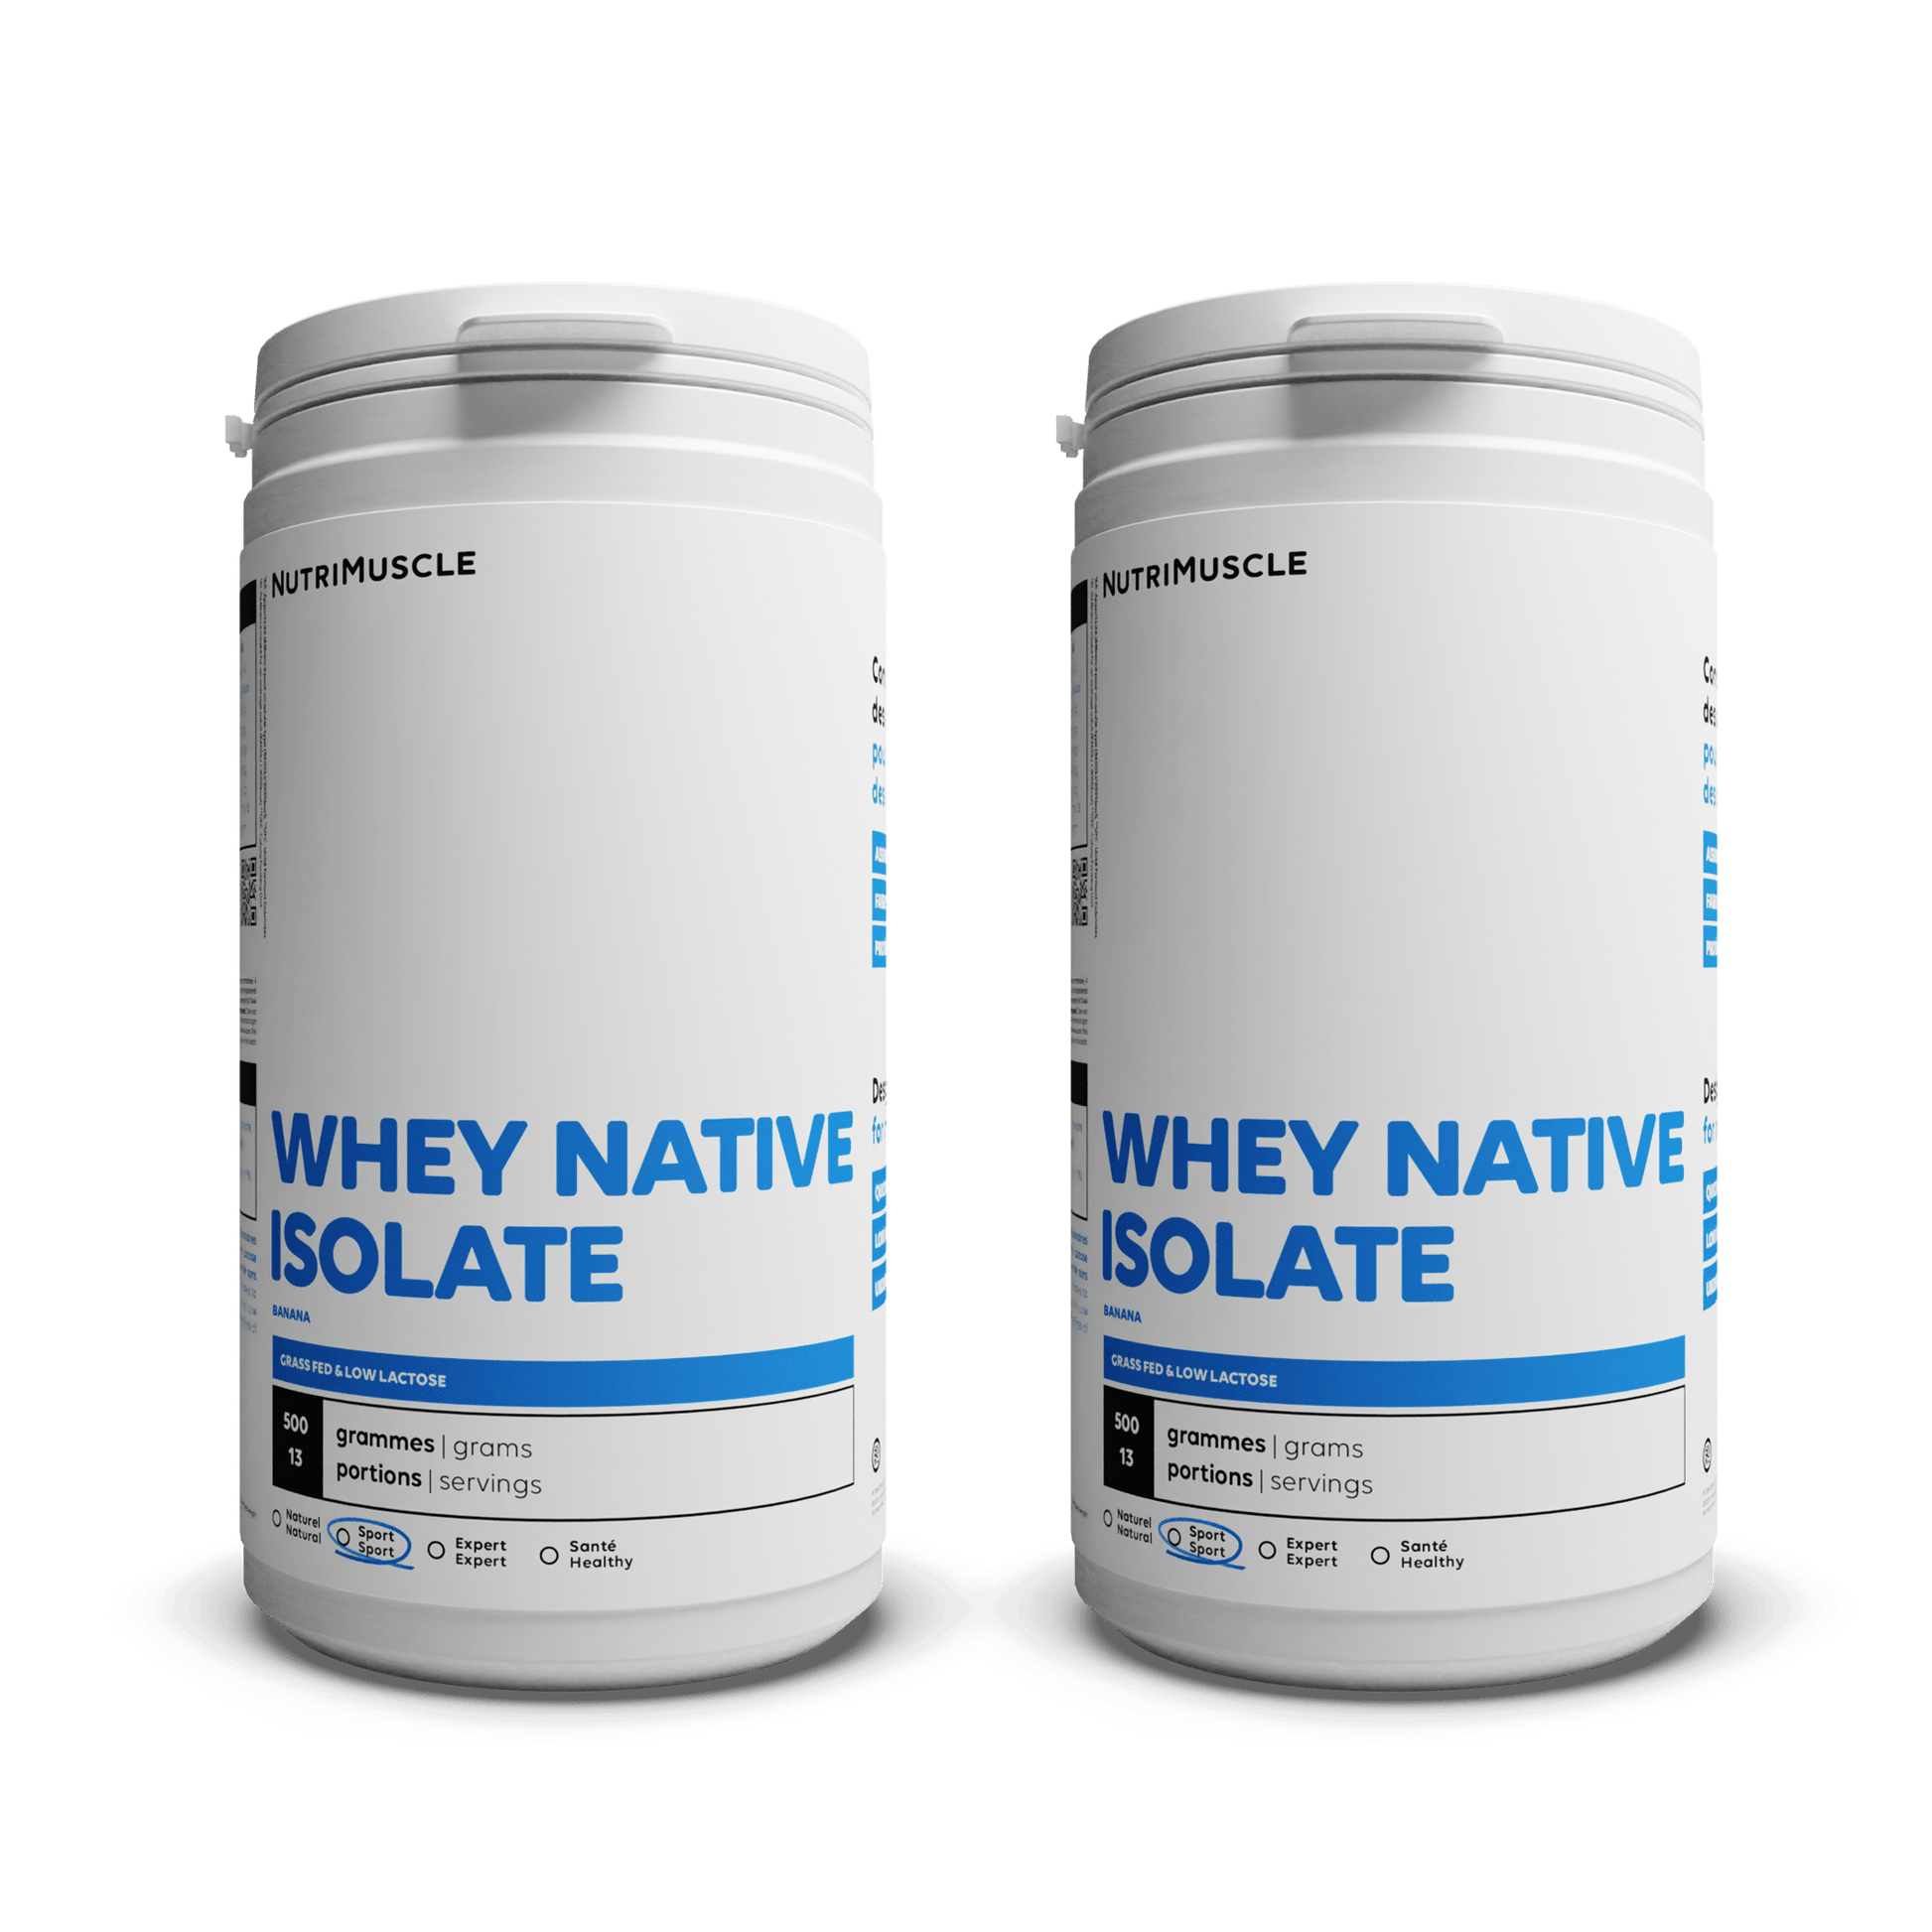 Nutrimuscle Protéines Banane / 1.00 kg Whey Native Isolate (Low lactose)